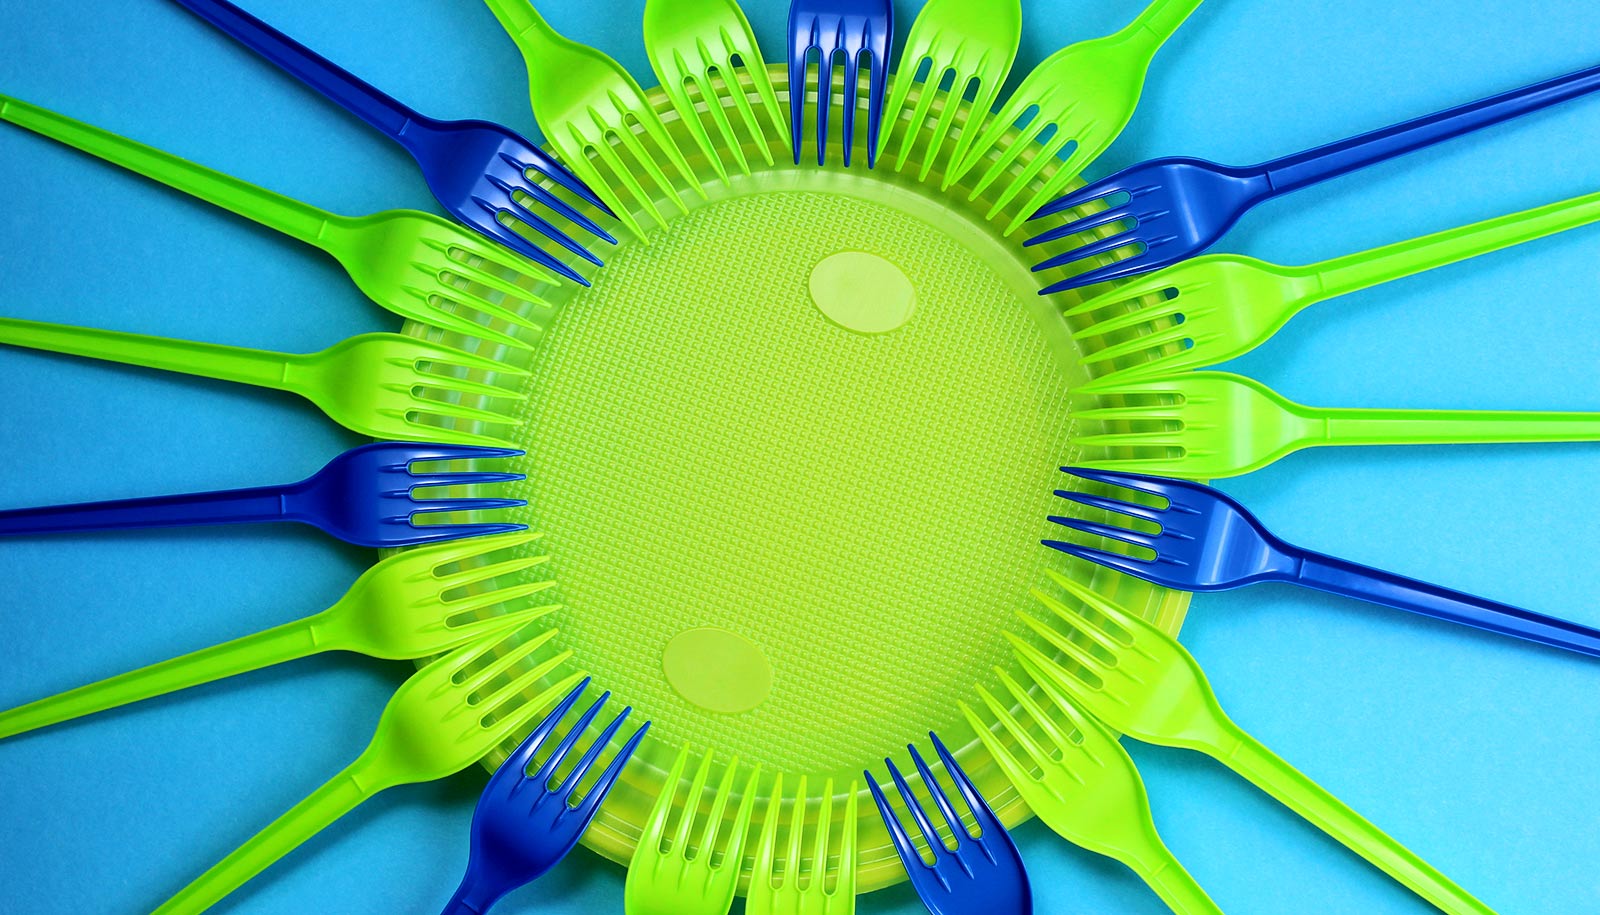 A sun shape made from green and blue plastic forks and a green plastic plate.